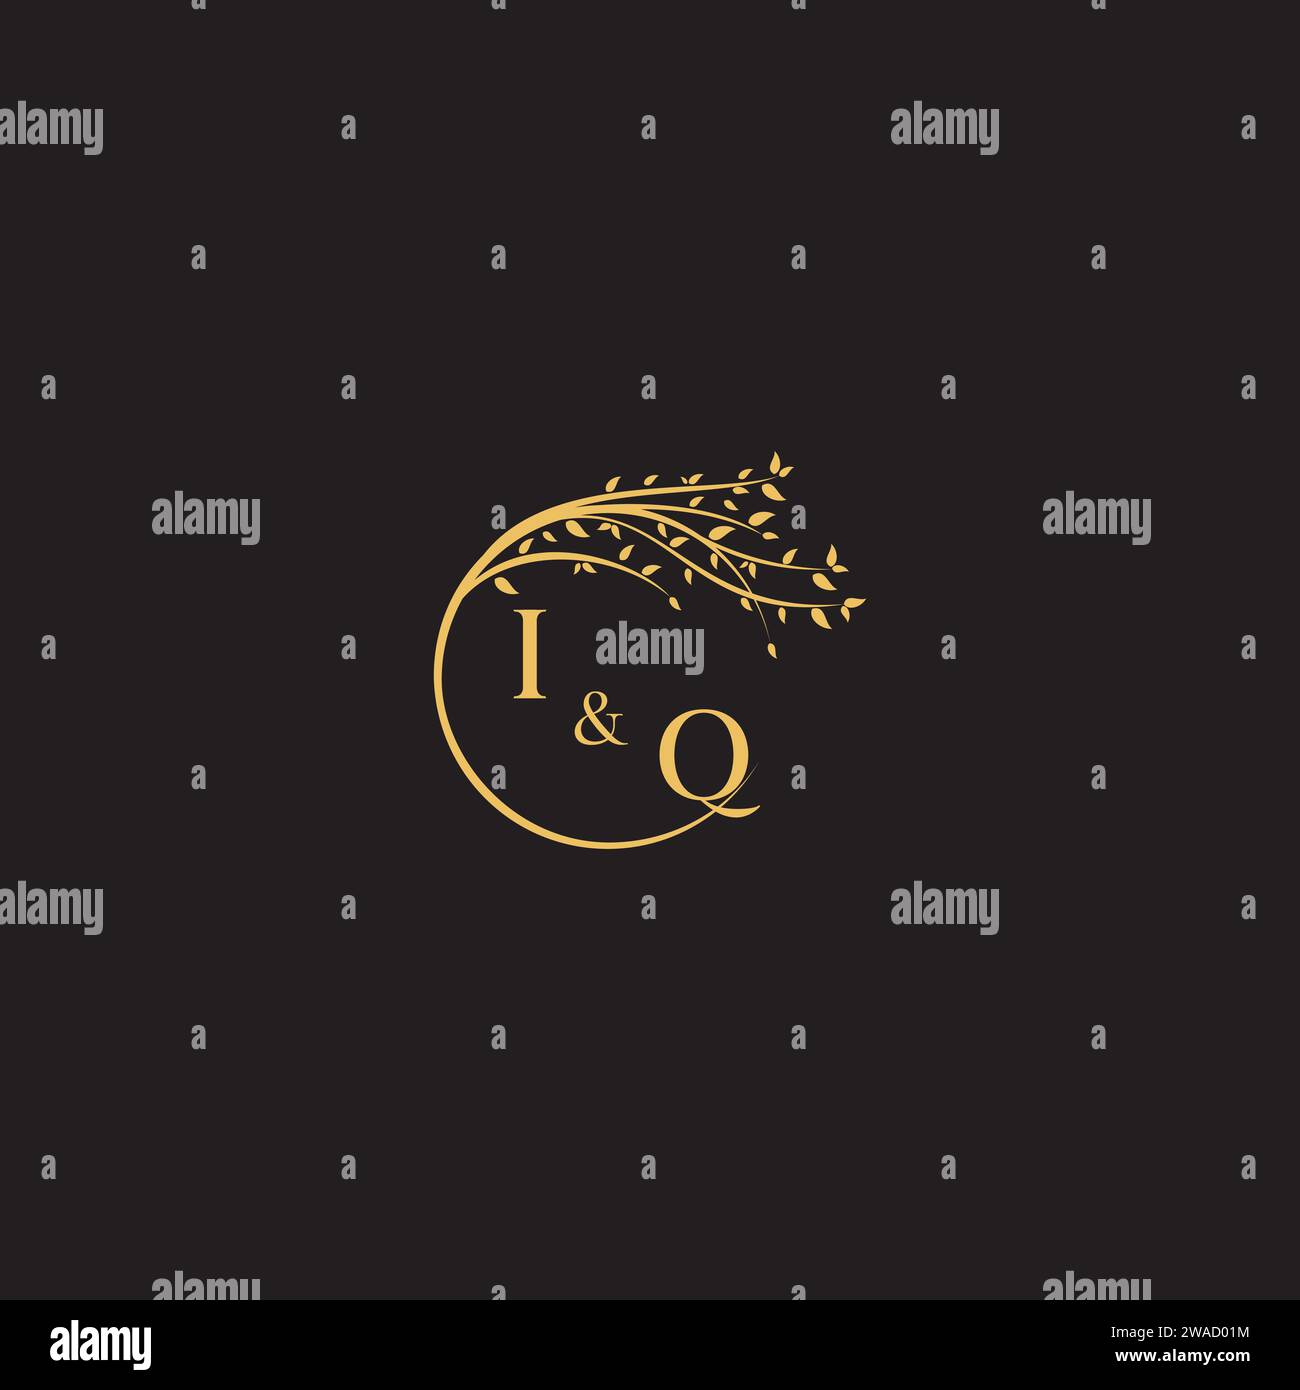 IQ nature tree concept in high quality professional design that will print well across any print media Stock Vector